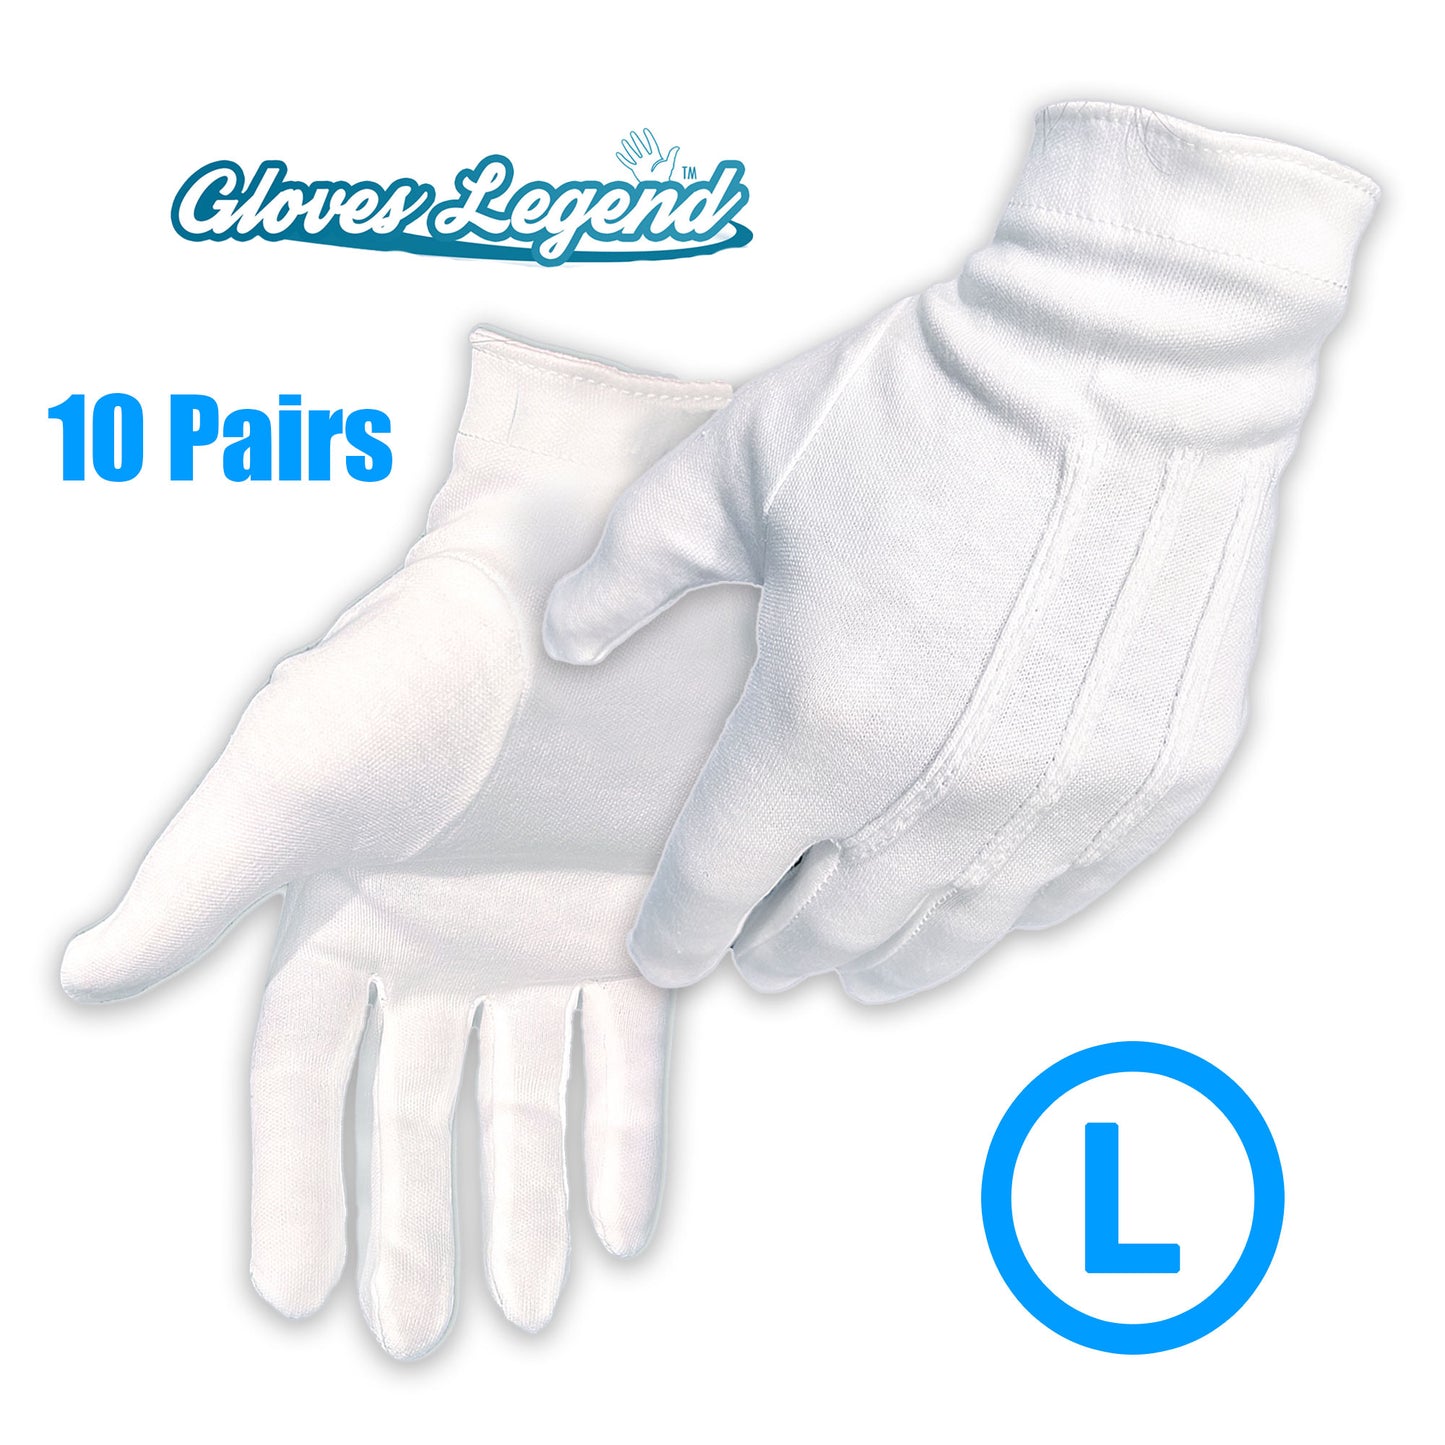 10 Pairs (20 Gloves) Size Large - Gloves Legend 100% White Cotton Marching Parade Formal Dress Gloves - Buy With Prime